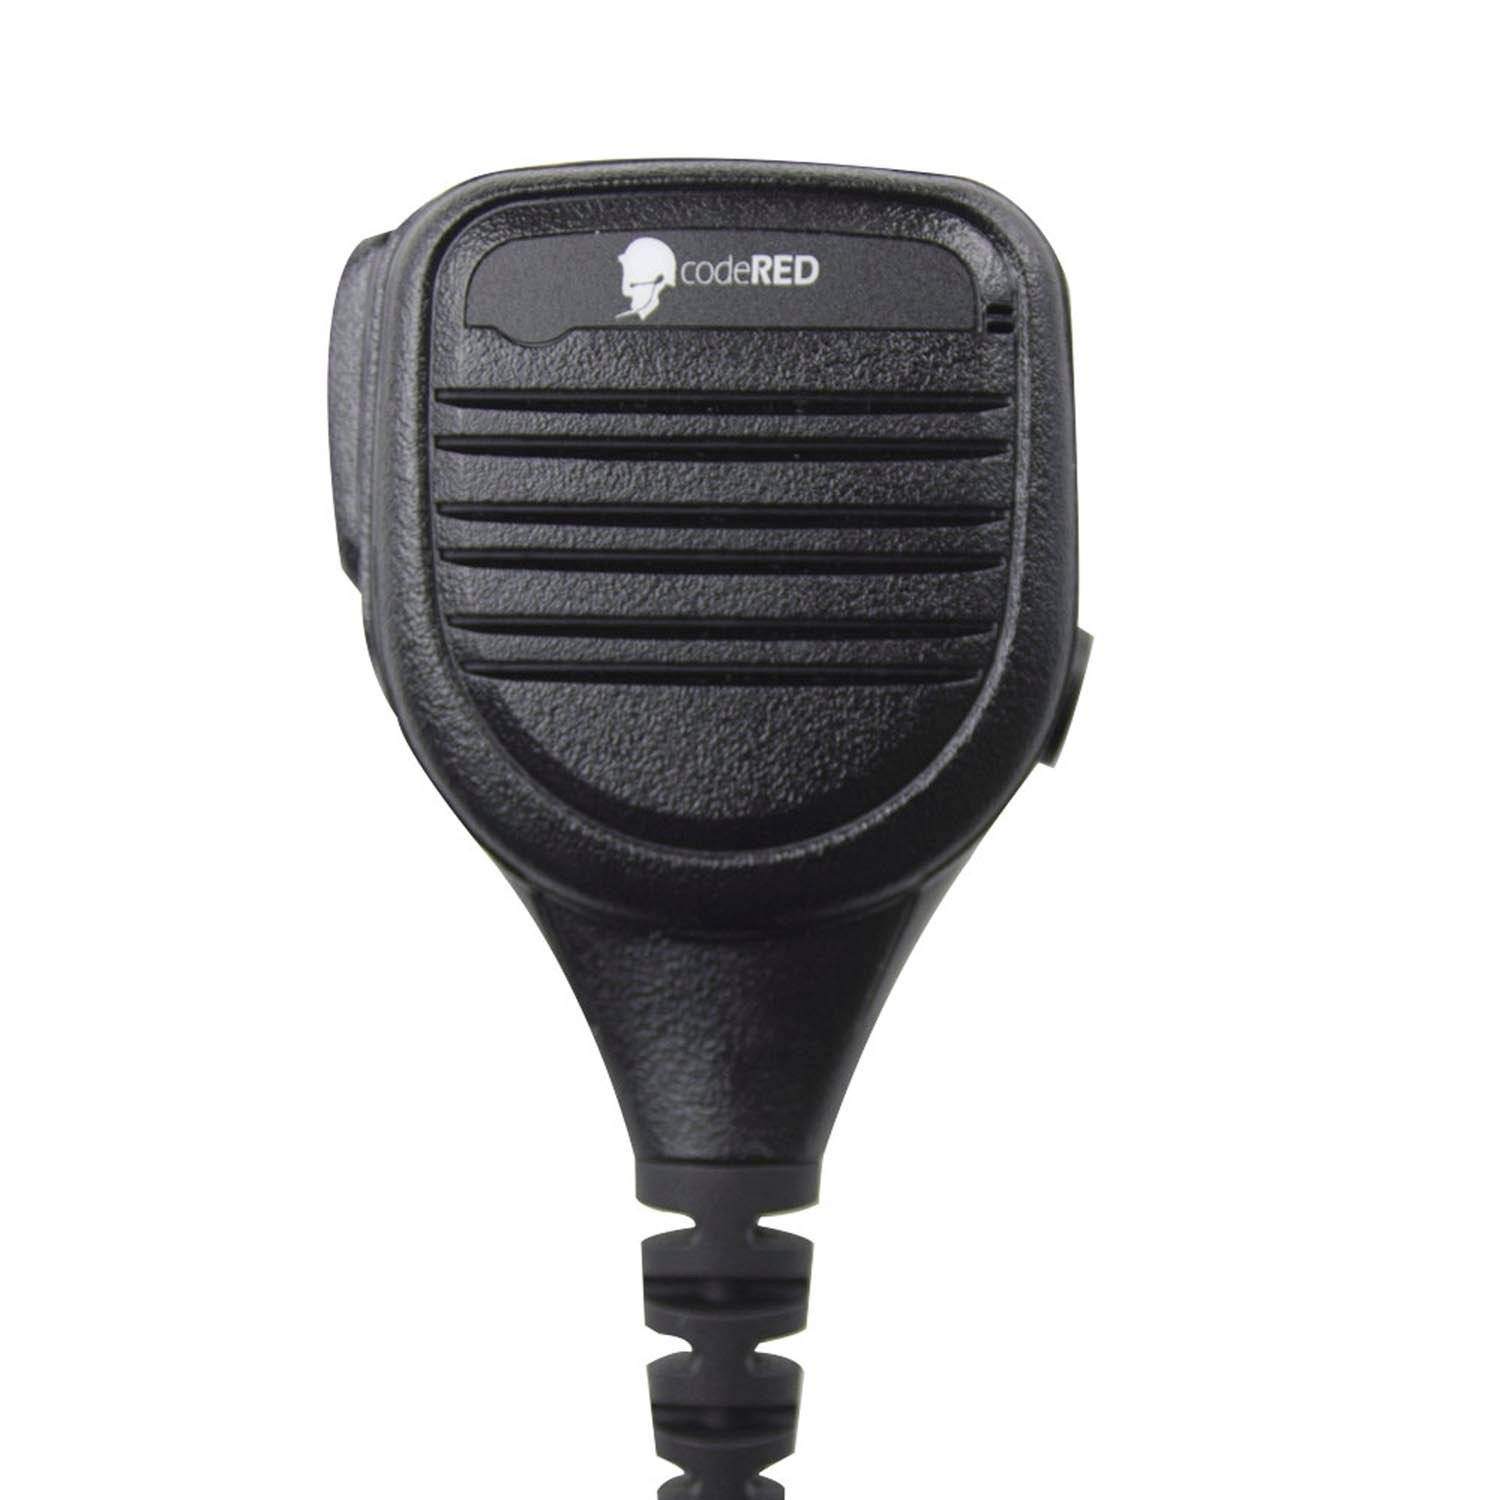 Code Red Signal 21 Speaker Mic for Motorola APX & XPR Radios